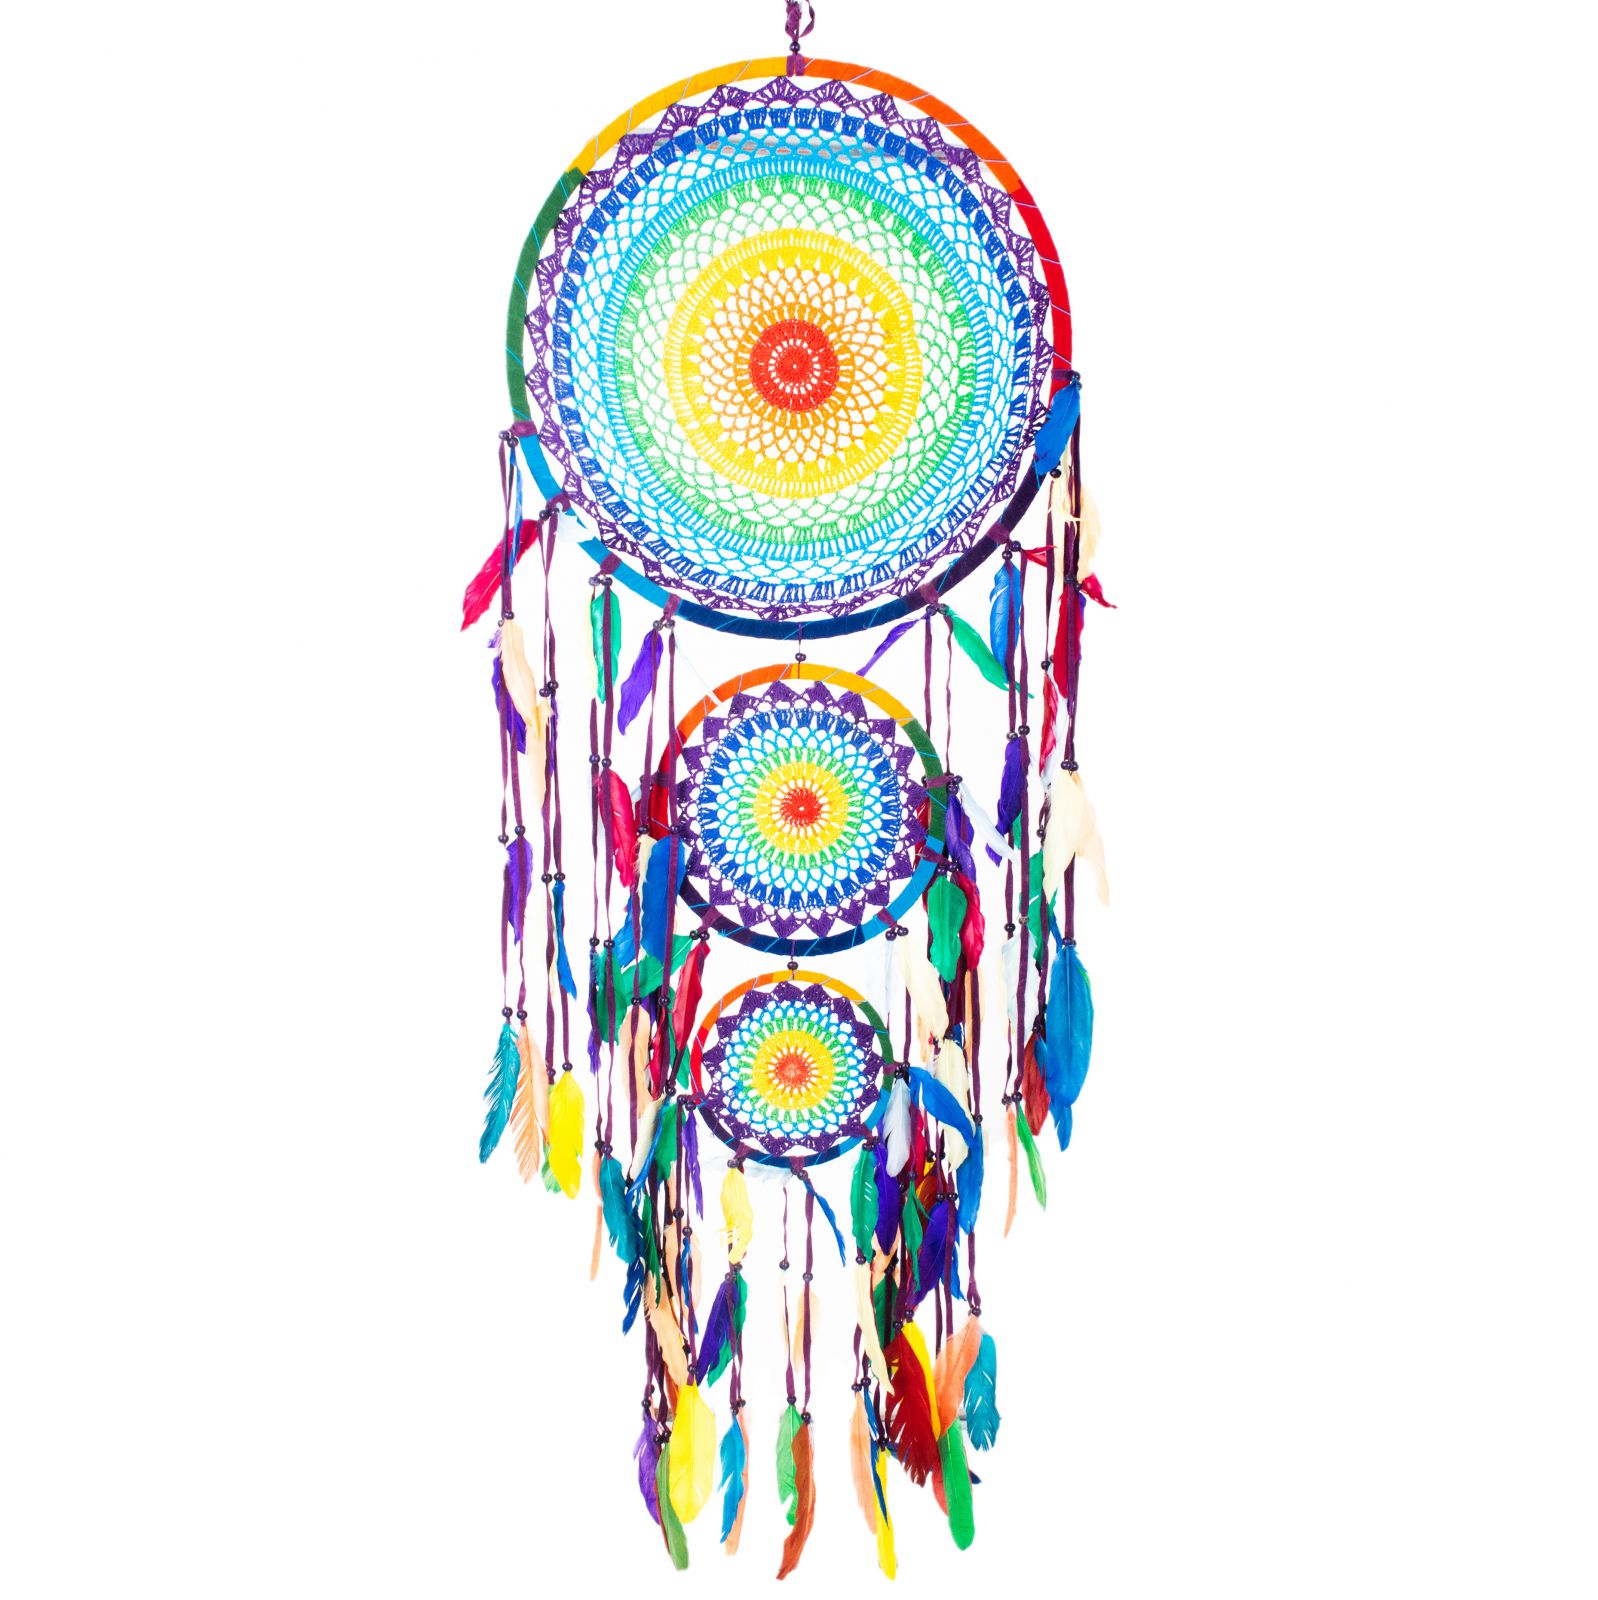 Crocheted dream catcher Dreaming about Rainbows Indonesia